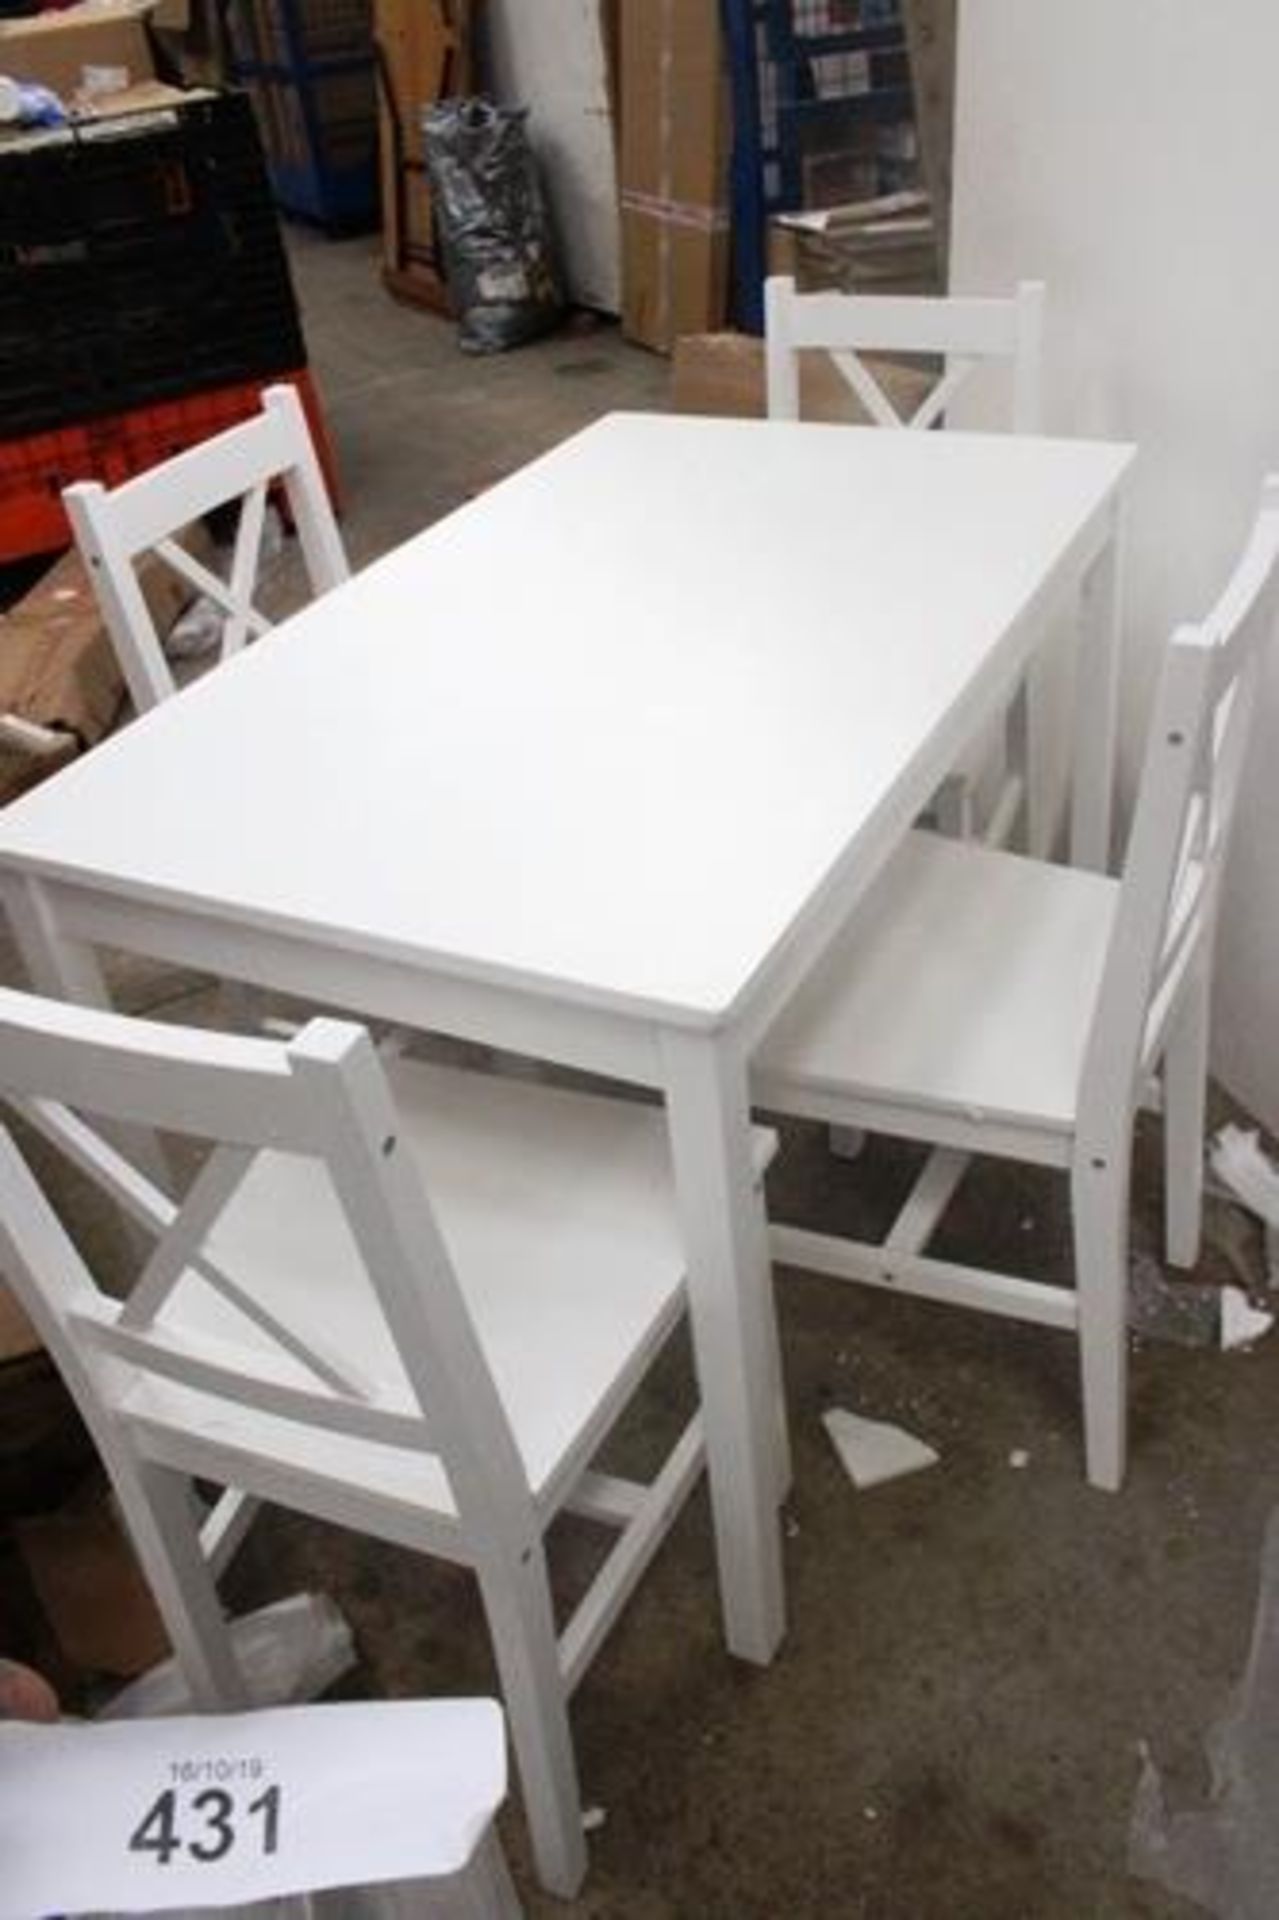 A Yakoe white dining set, model 21396, includes table and 4 chairs - New (GSF9)